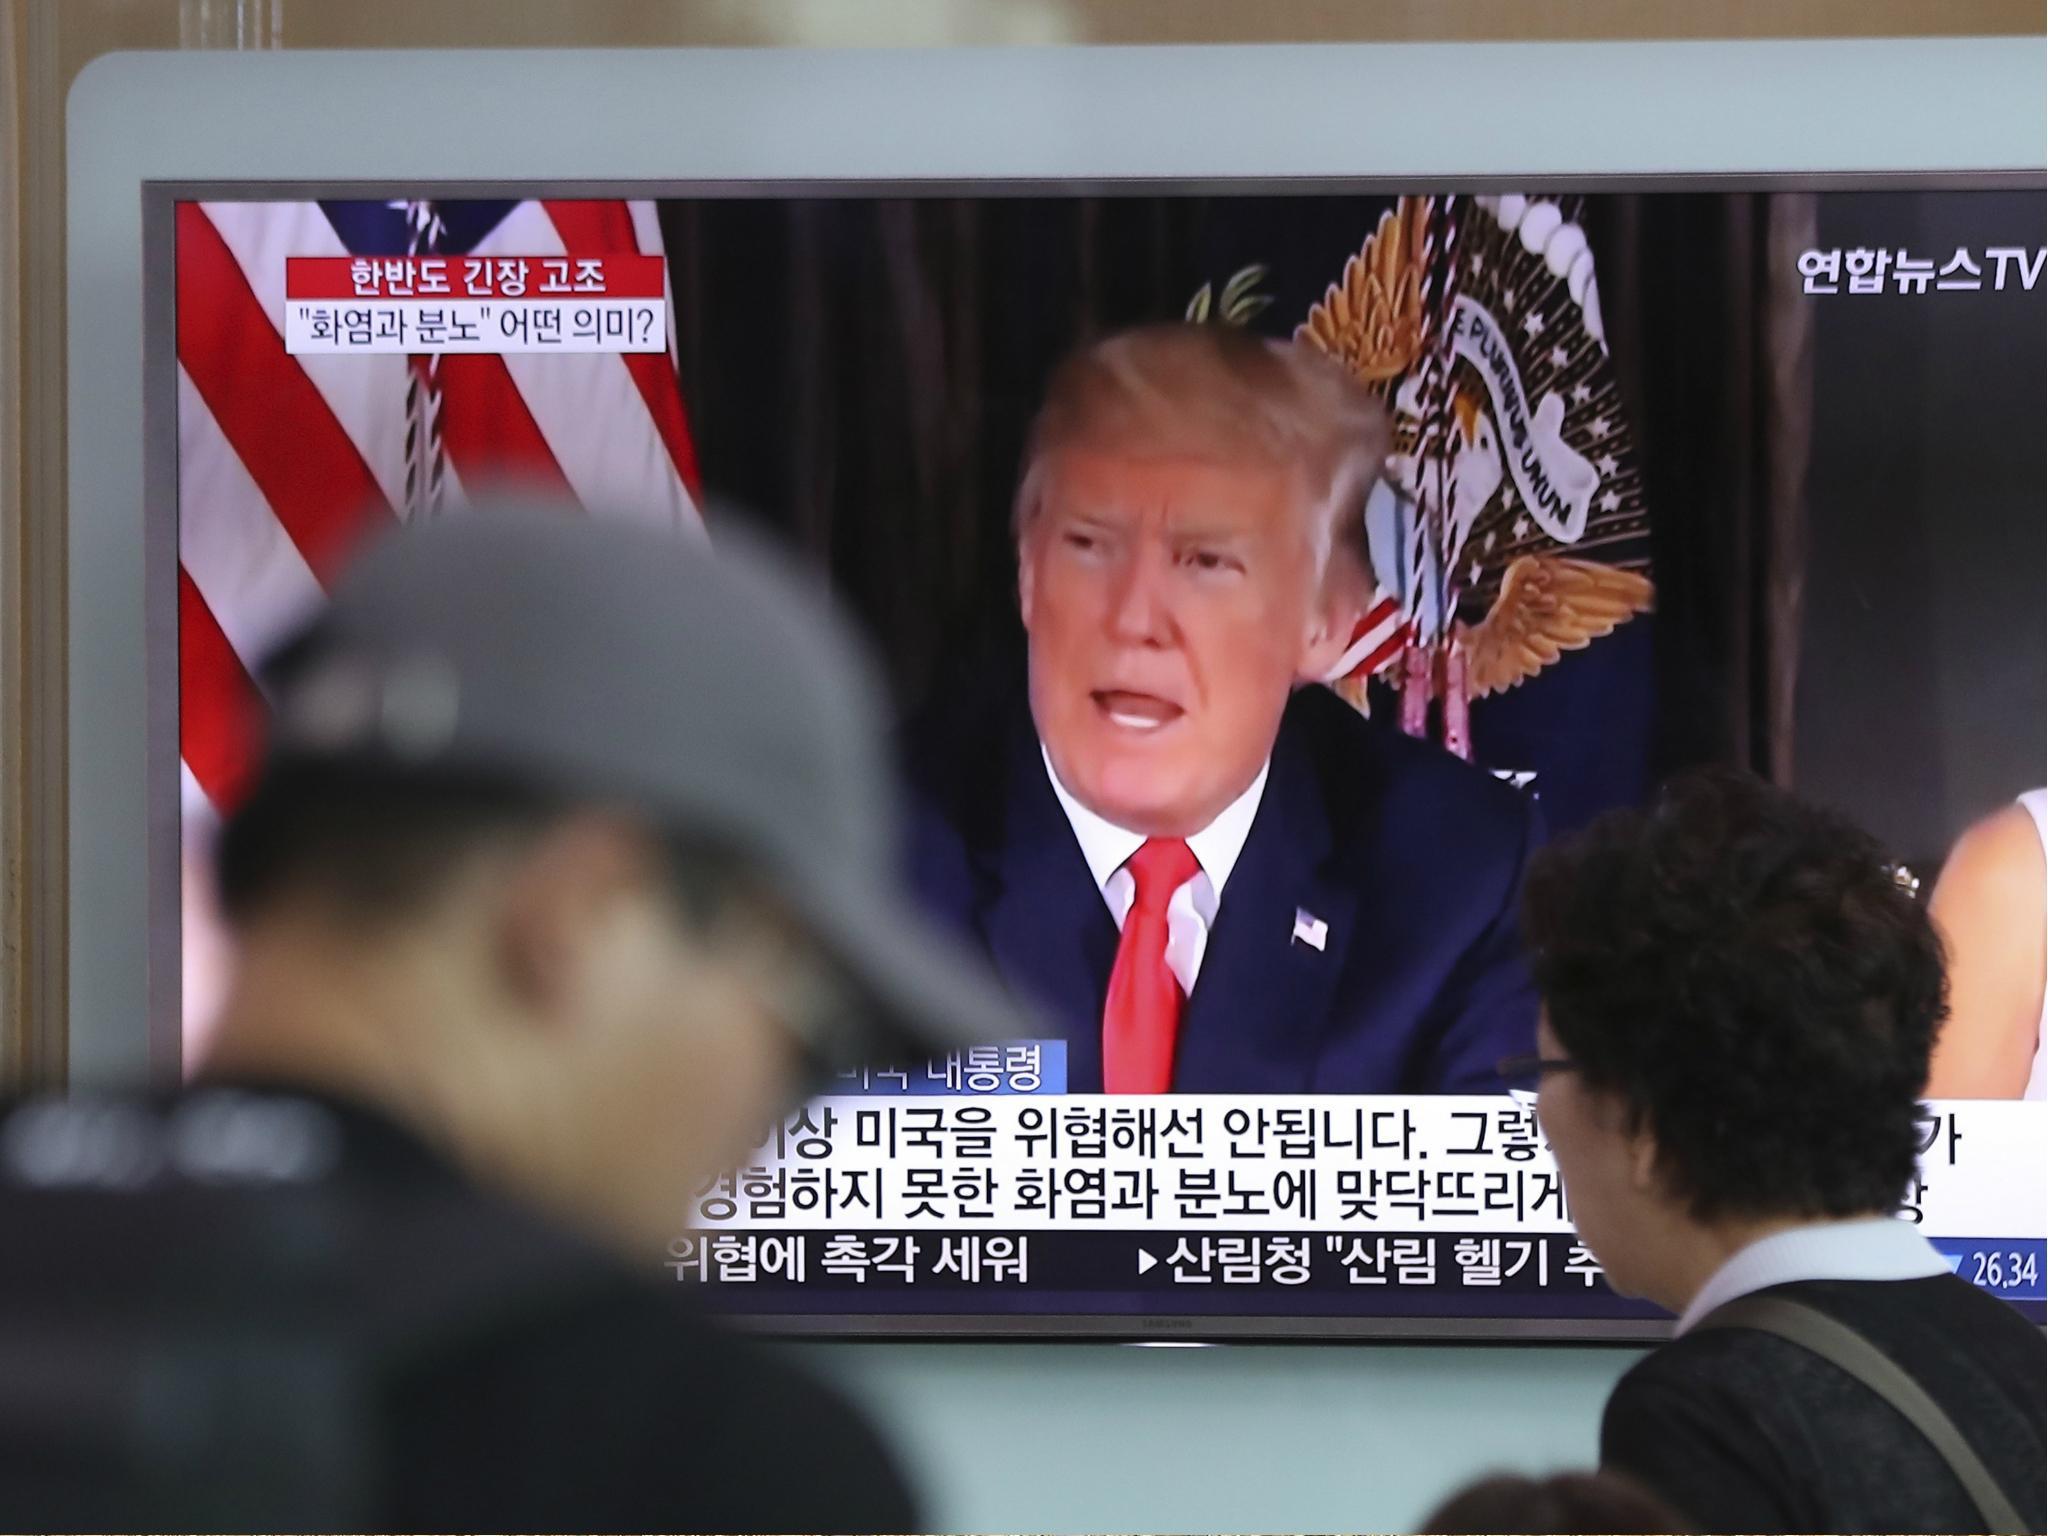 People walk by a TV screen showing a local news program reporting with an image of U.S. President Donald Trump at the Seoul Train Station in Seoul, South Korea on 9 Aug 2017.